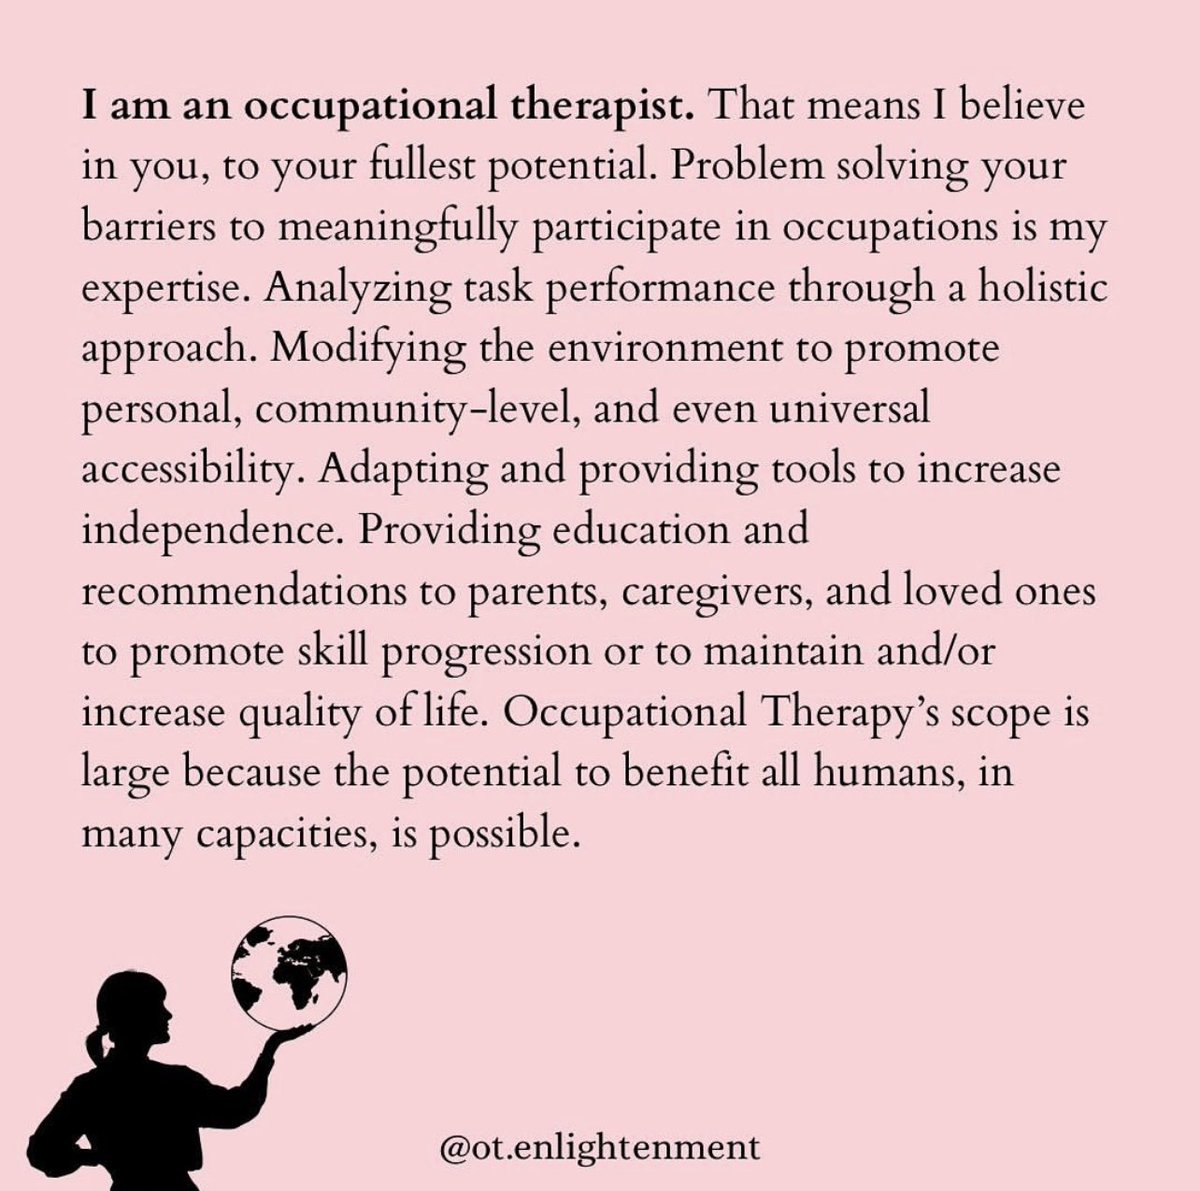 #OccupationalTherapists are the warmest people I’ve ever met. Something about their demeanour 🥰 Their detective skills, ability to problem solve, willingness to know more about an individual. We analyse & pinpoint strengths & weaknesses🧚🏻‍♀️ As OTs we connect with people so deeply.